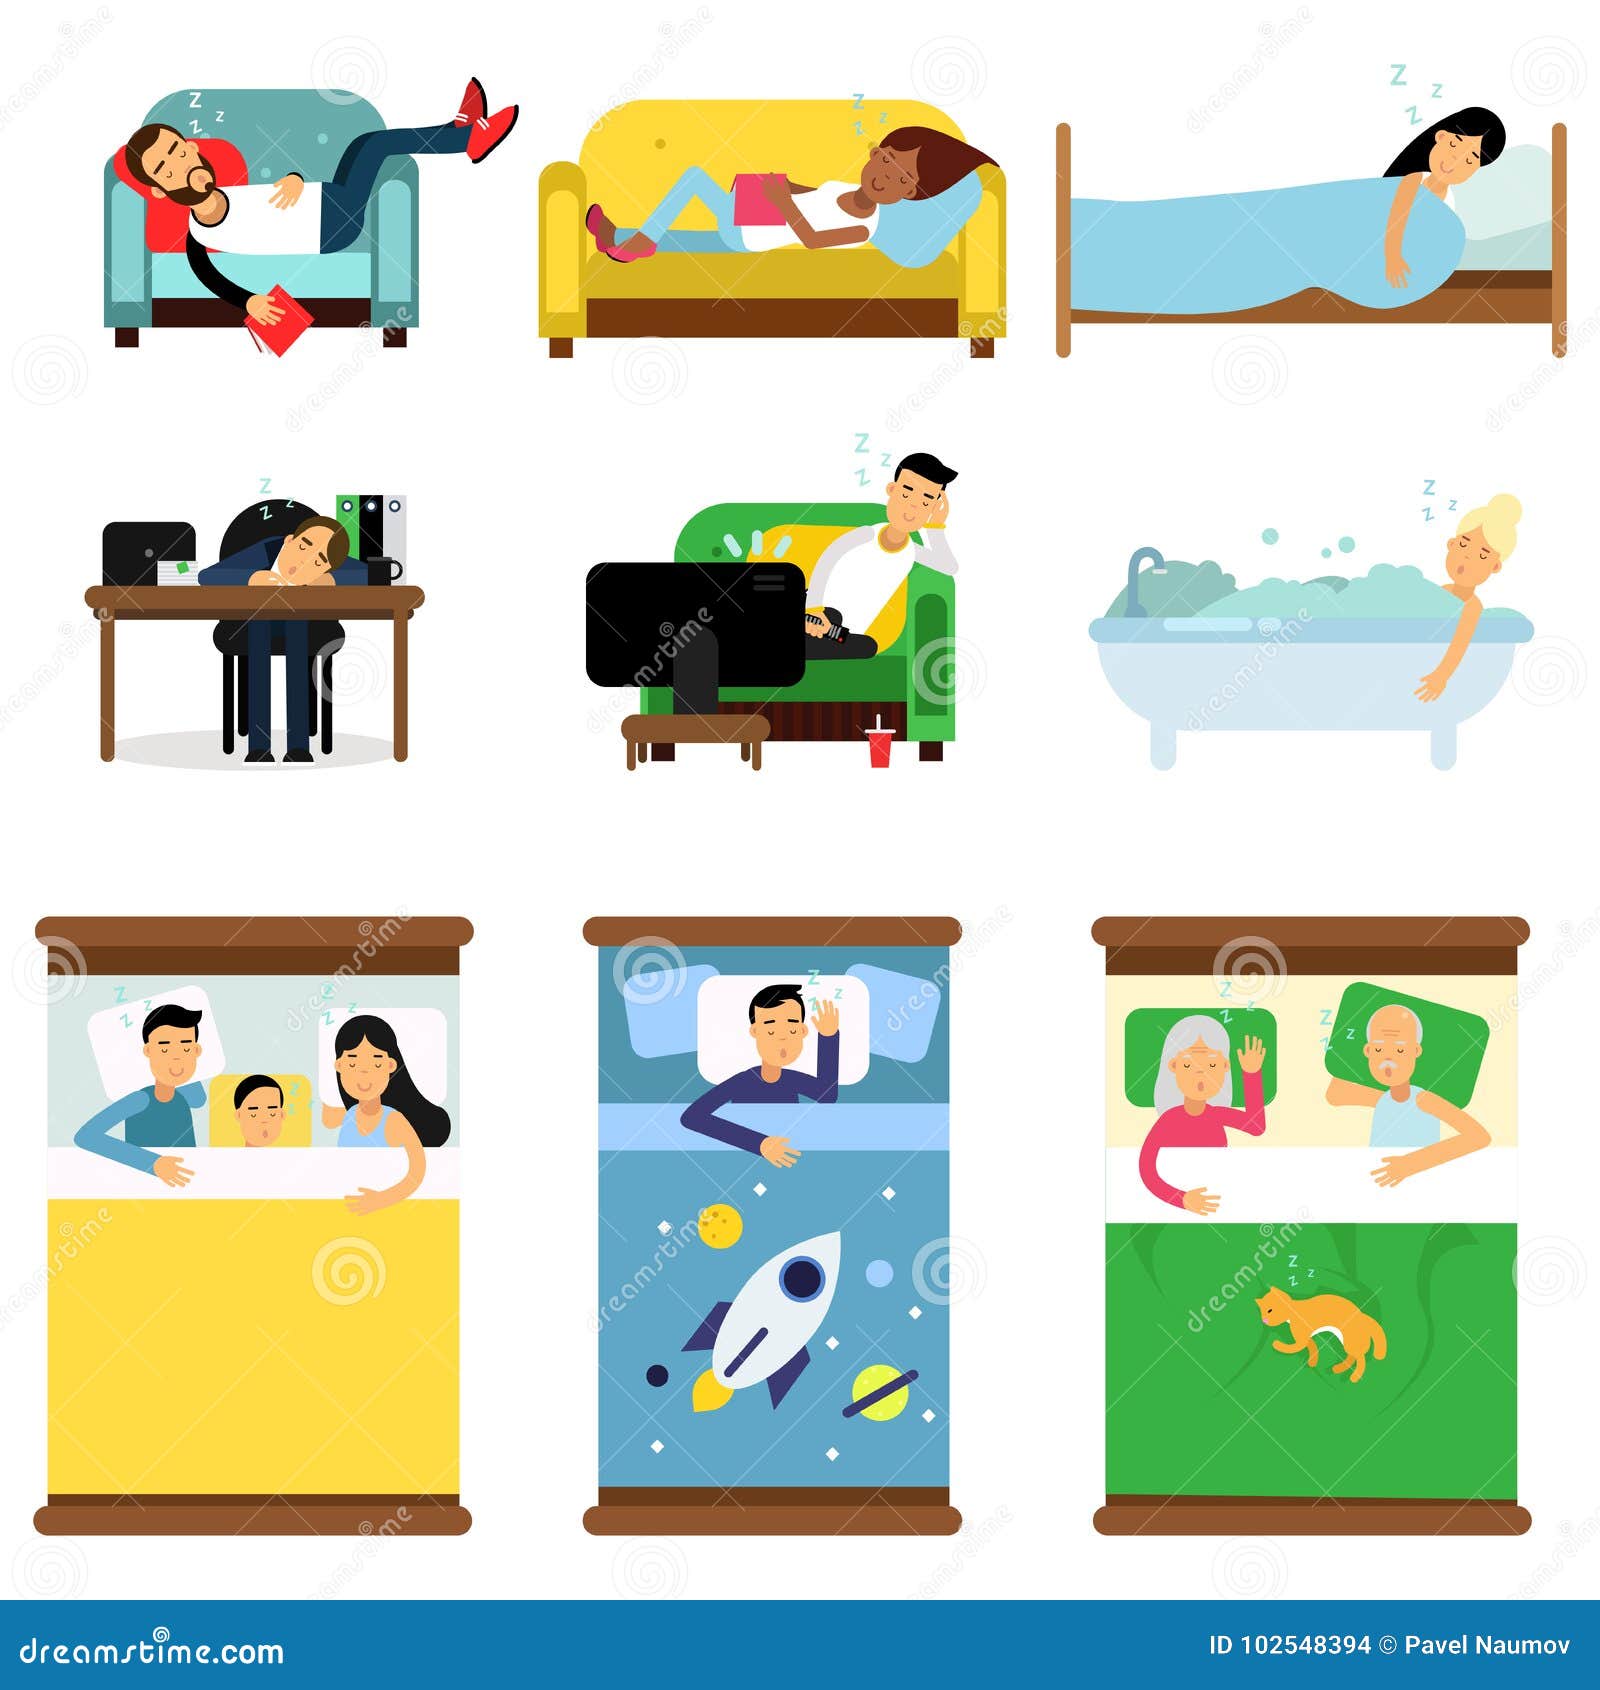 People Sleeping at Home, at Work Set, Men and Women Sleeping in Bed, Sofa  with Kids, Pets, Together Cartoon Vector Stock Vector - Illustration of  bedroom, family: 102548394